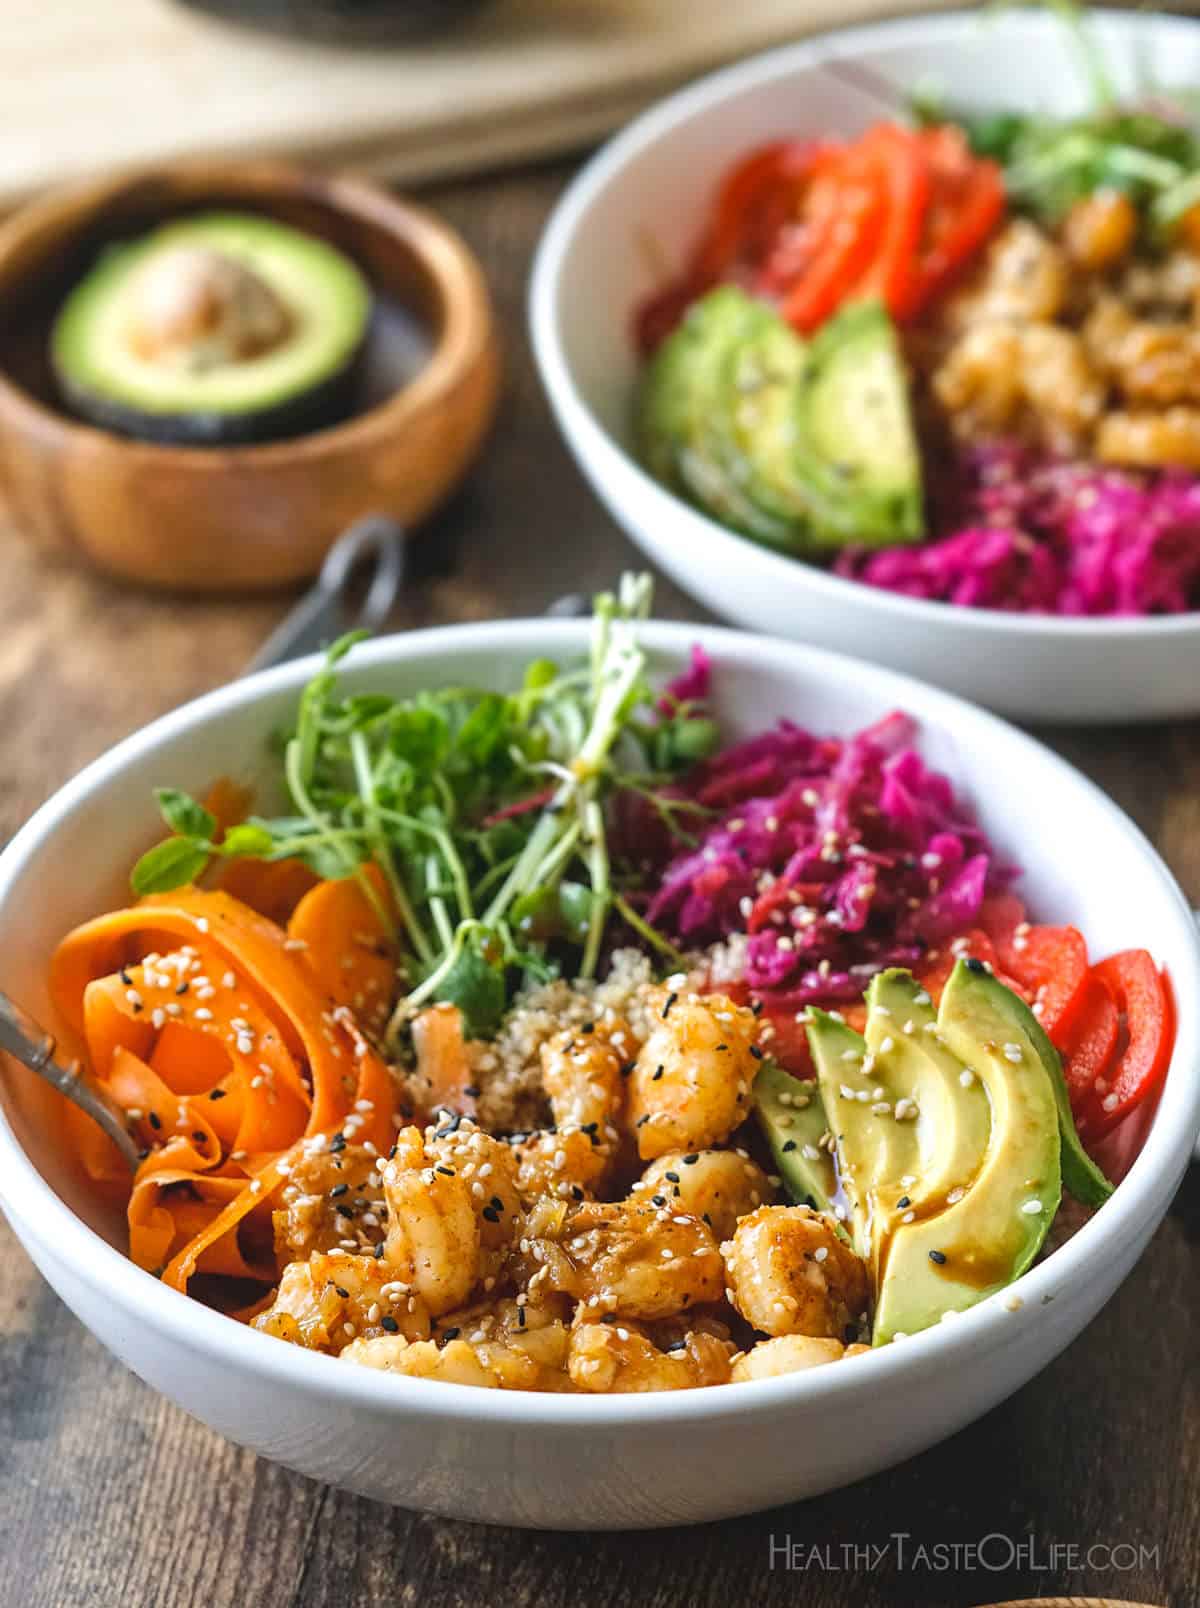 Quinoa poke bowl with shrimp and rainbow colors: carrots, bell peppers, avocado, sauerkraut, sprouts and poke sauce.